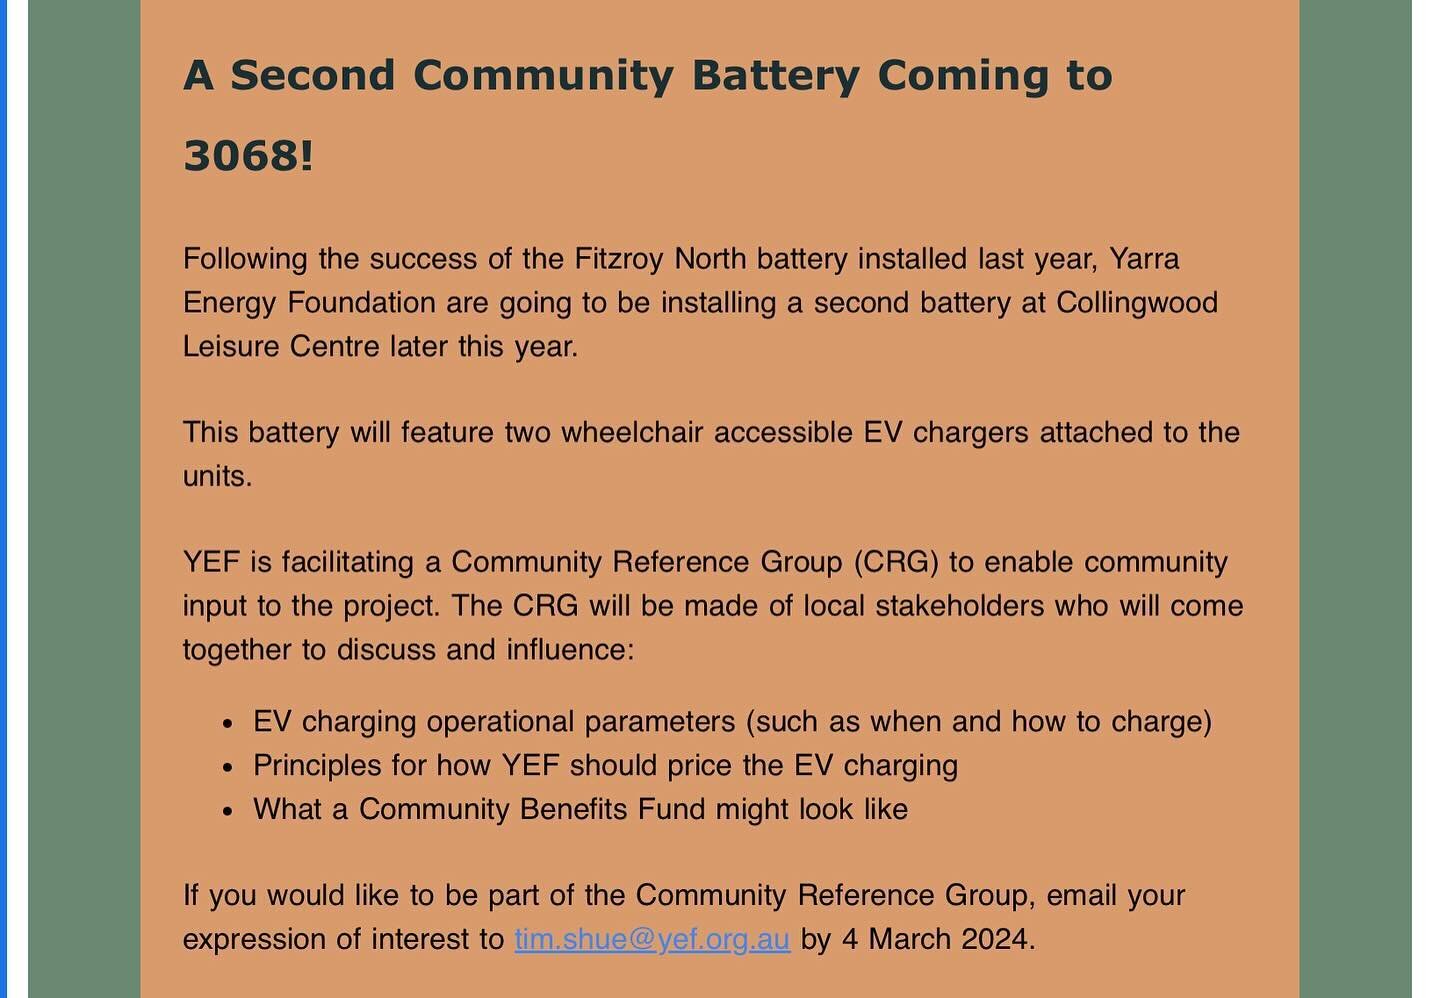 Join the Community Reference Group.  More details at Yarra Energy Foundation https://www.yef.org.au/community-batteries/clifton-hill-neighbourhood-battery/